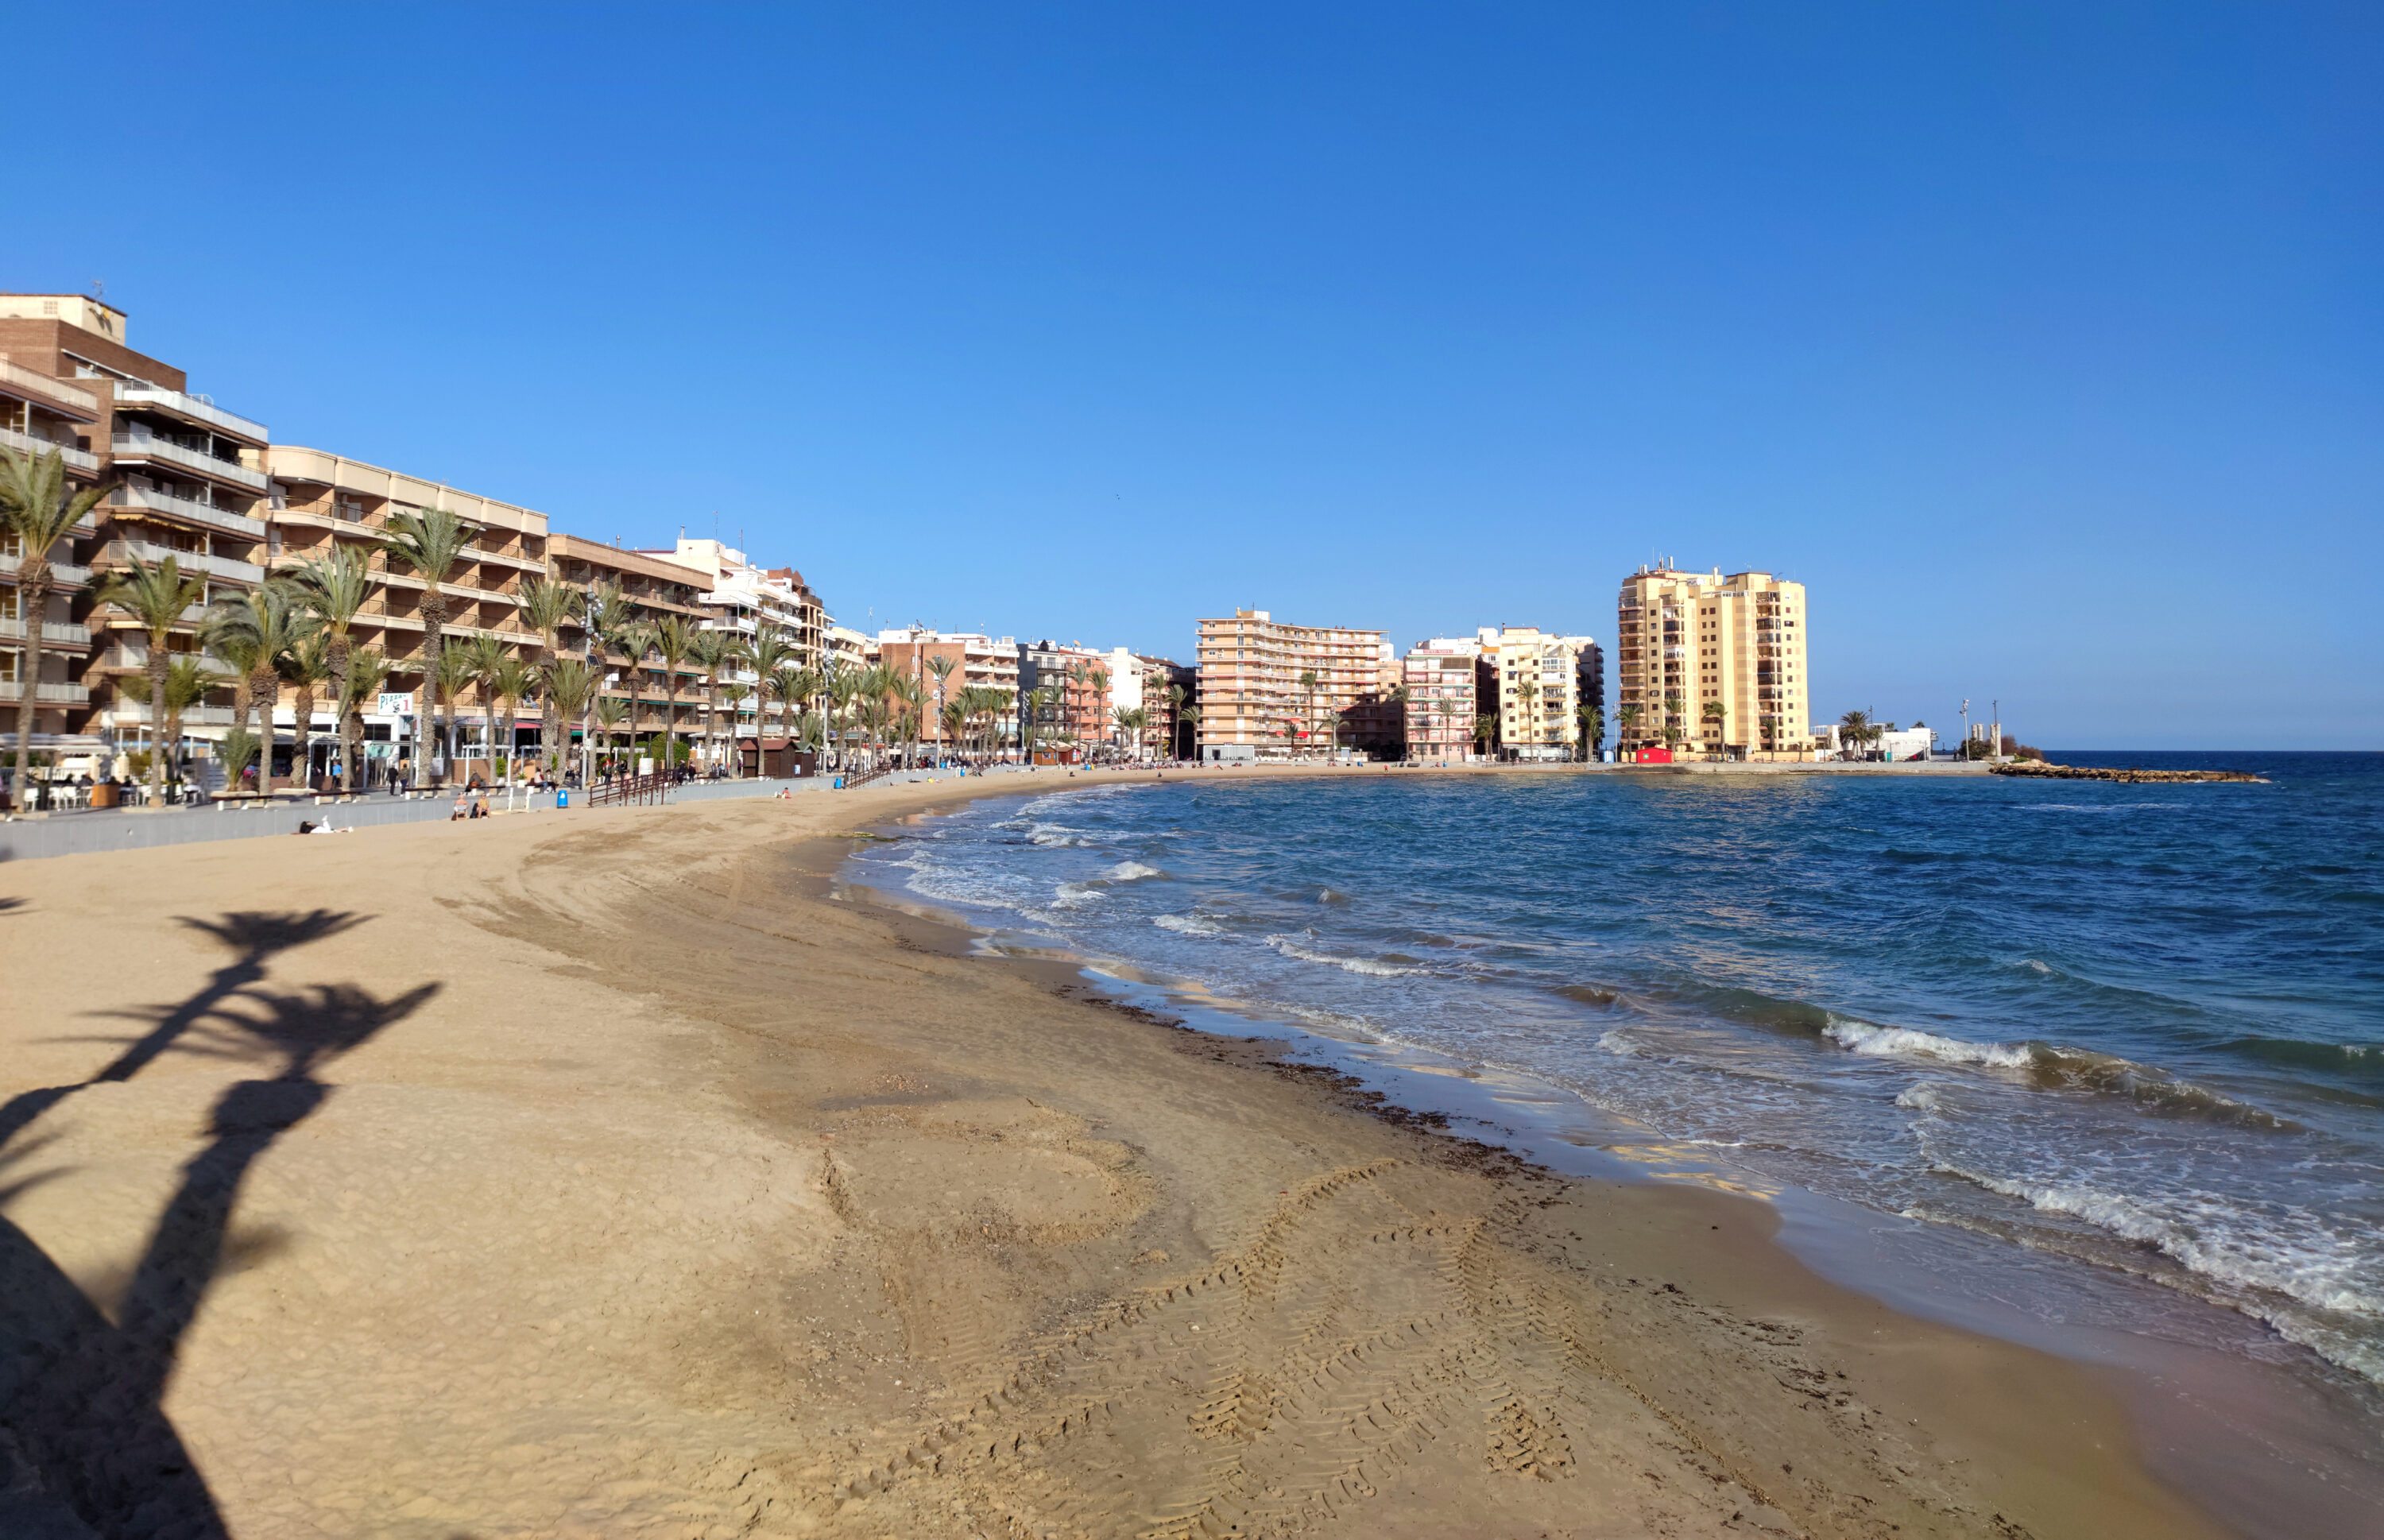 Playa del Cura beach in the center of Torrevieja, Spain